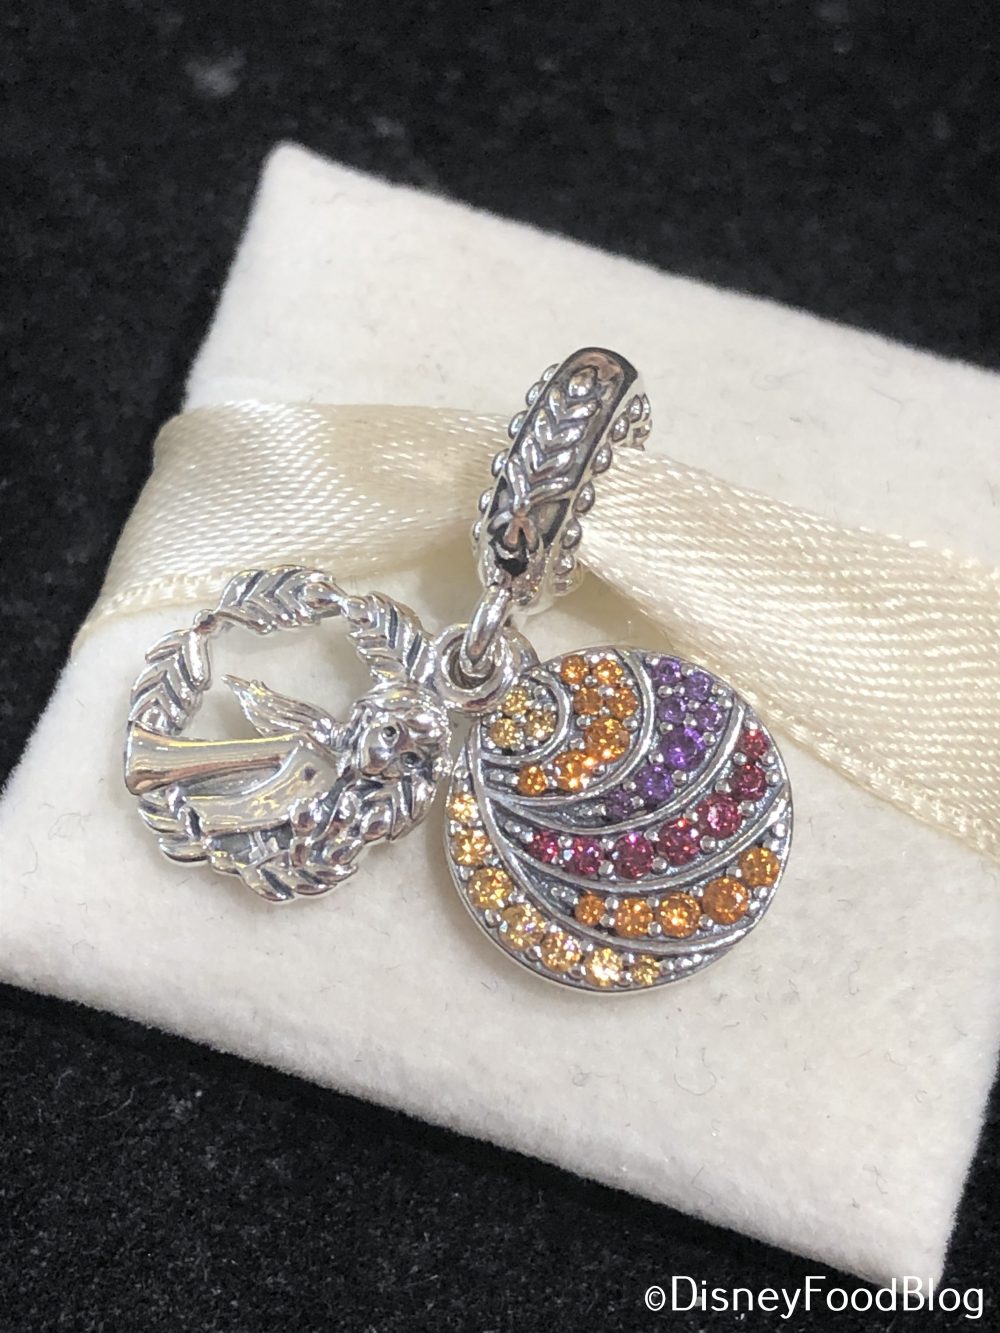 We Just Met Them, But We're in with the NEW Frozen Pandora Charms in Disney Springs! | the disney food blog